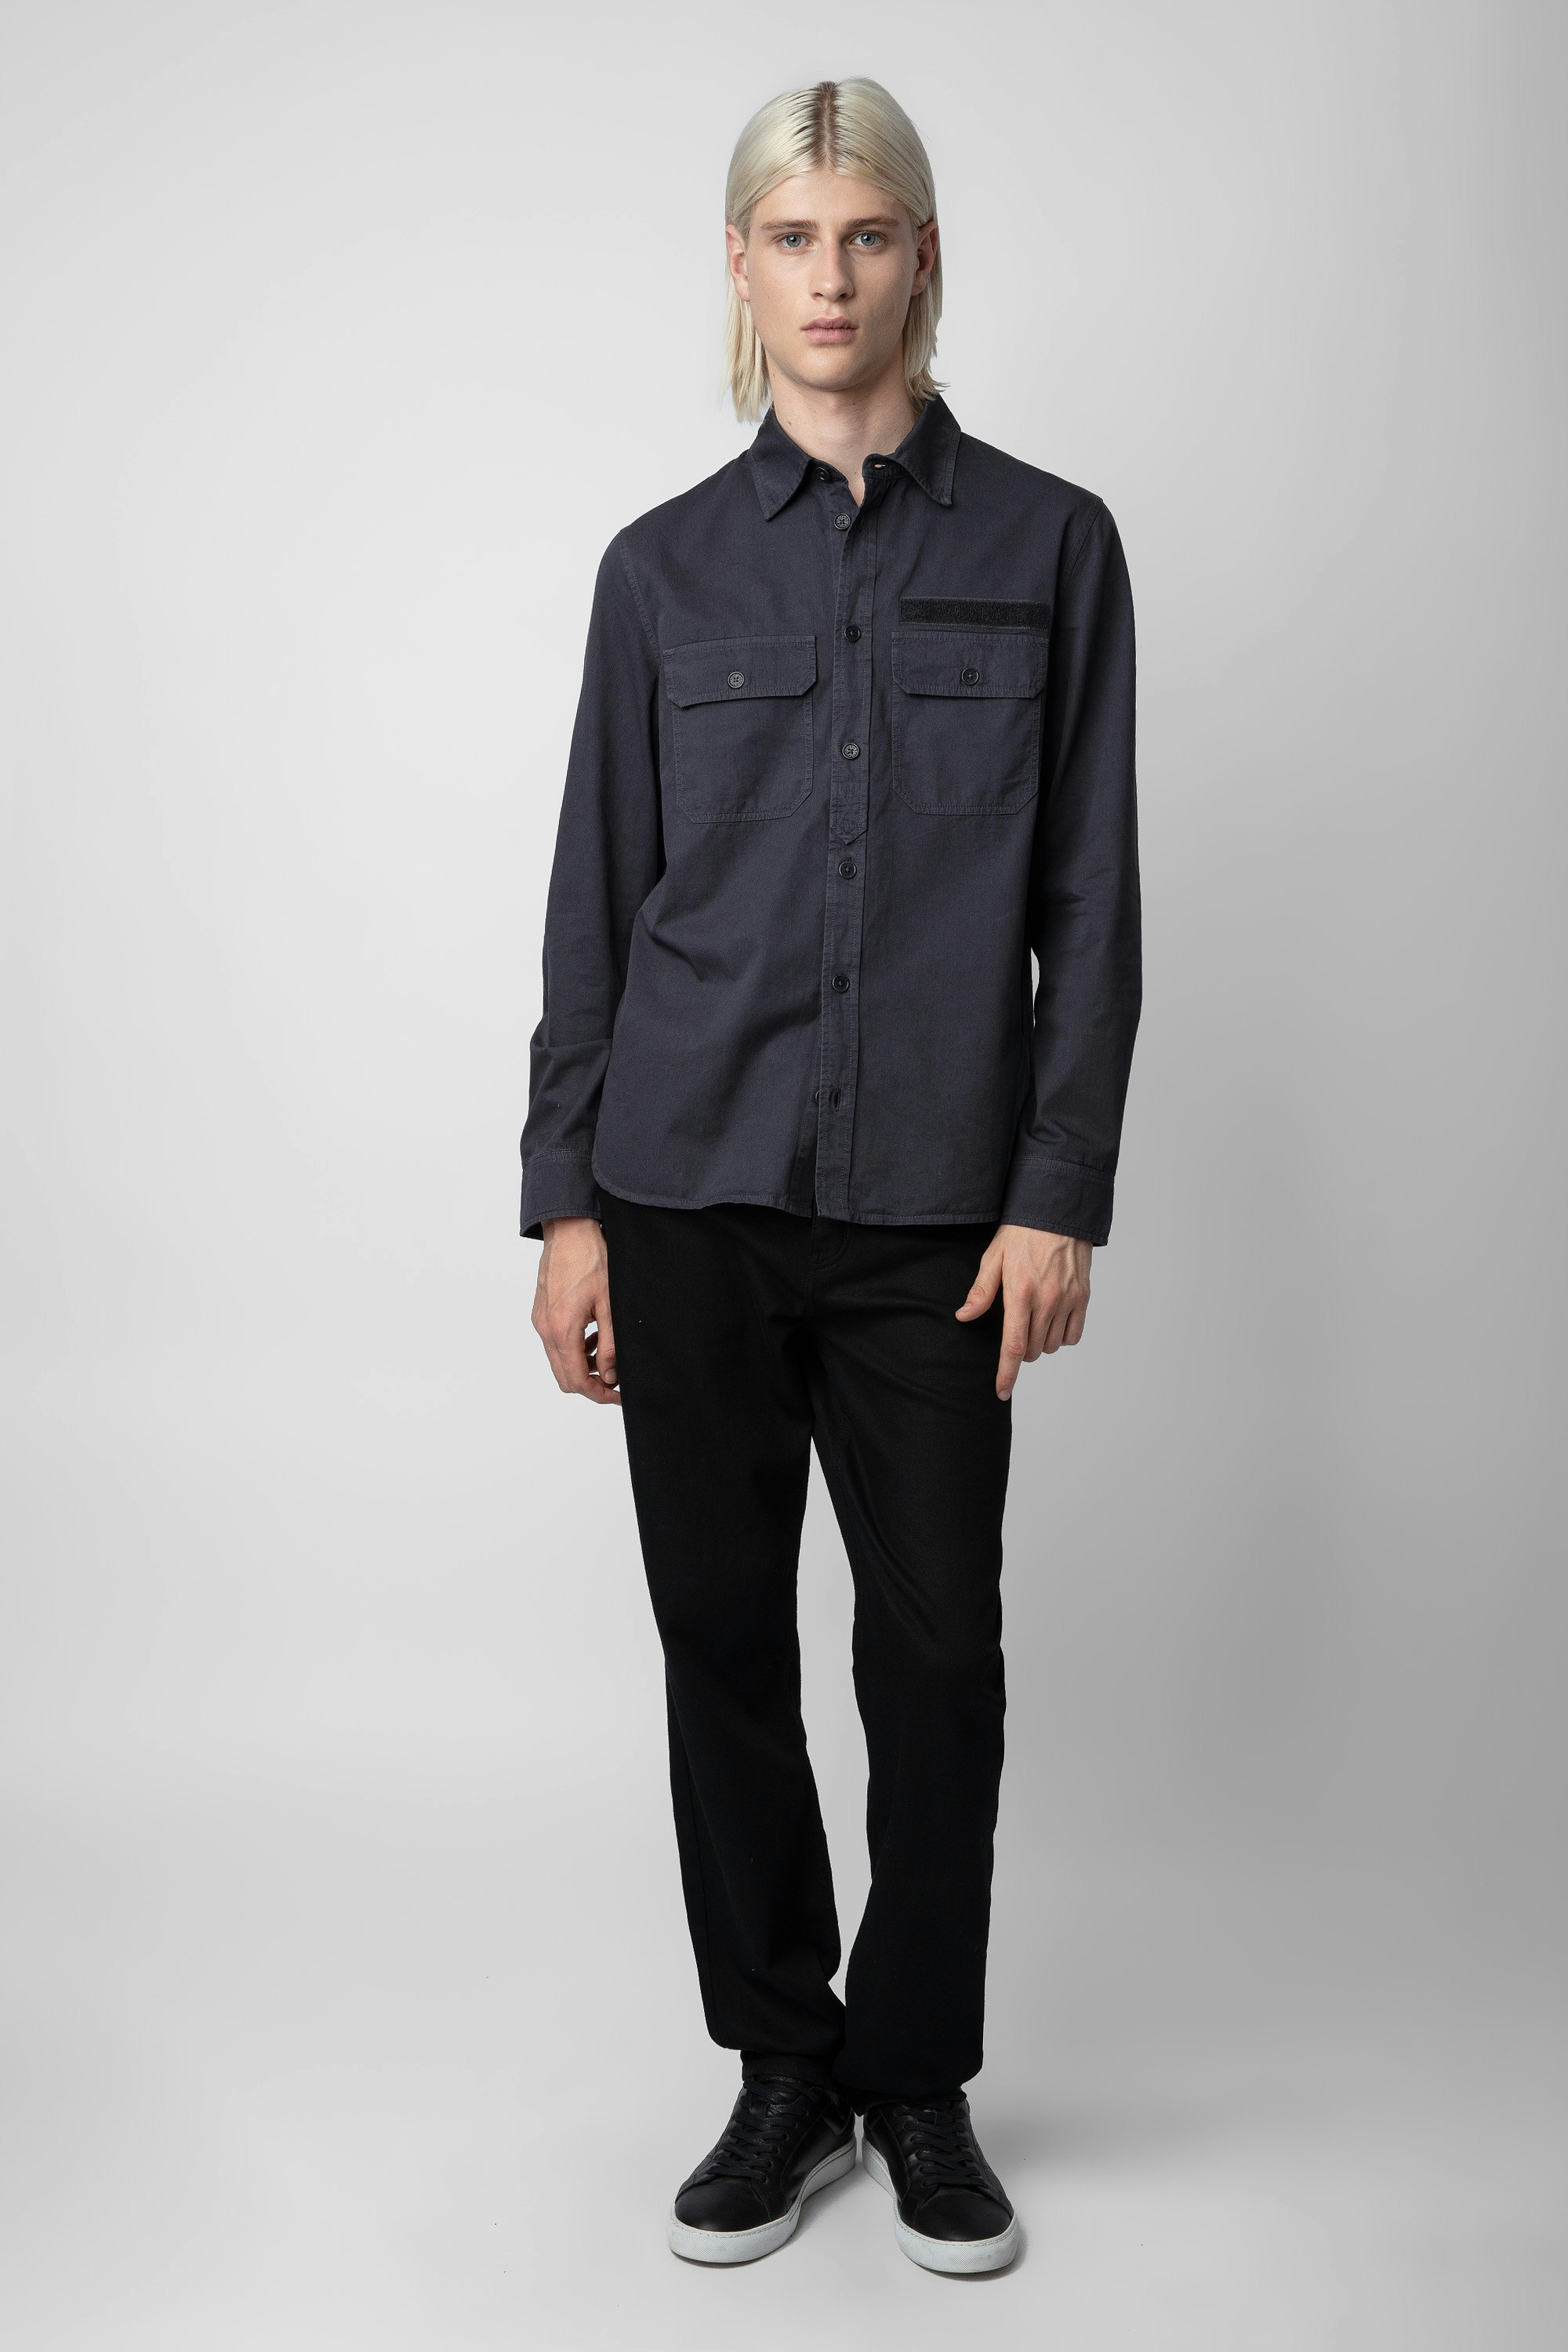 Serge Shirt - Men’s grey cotton shirt with Z.Voltaire patch.